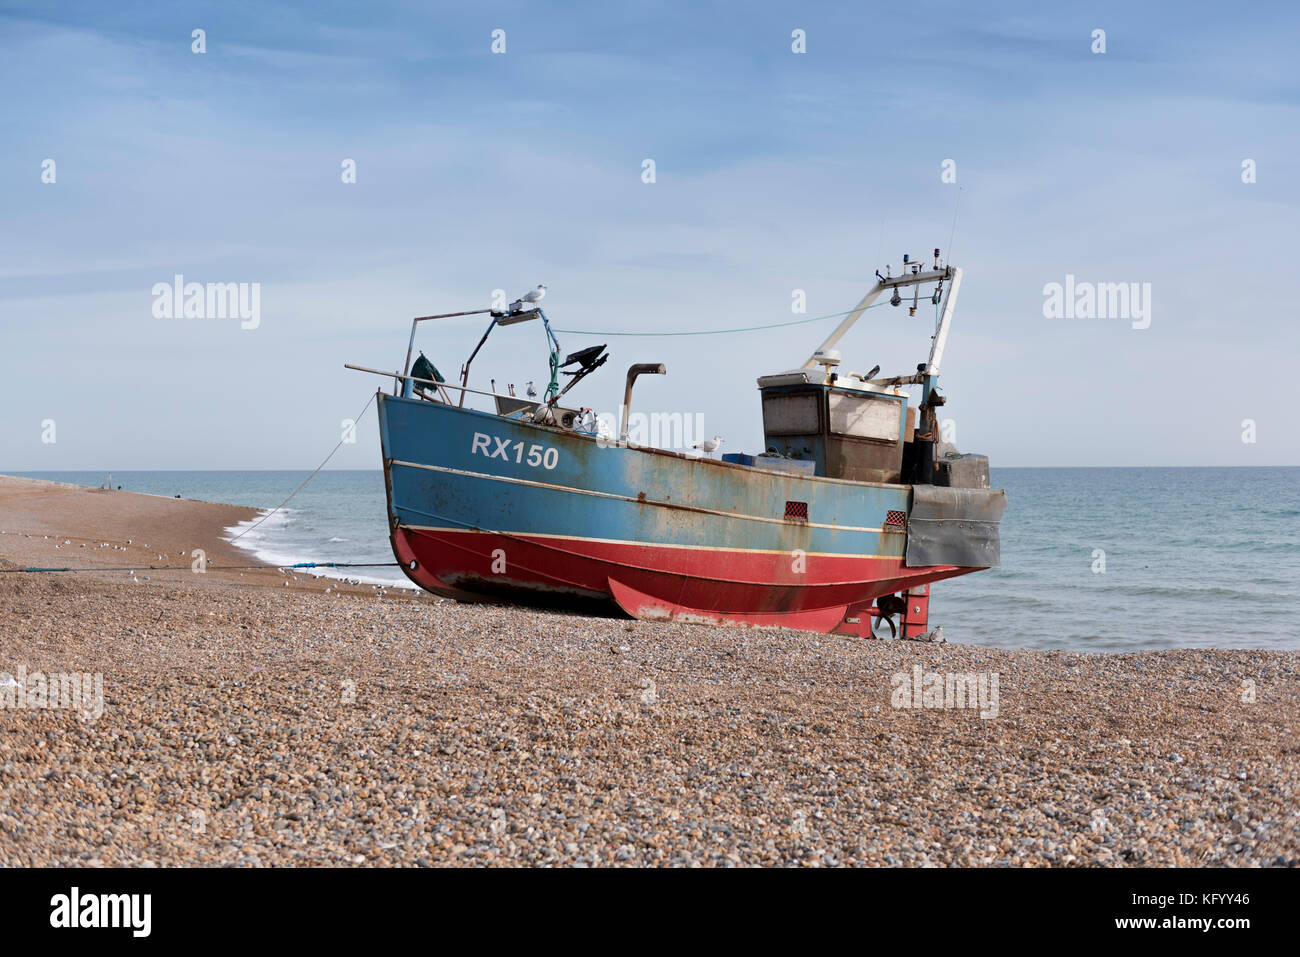 Fishing boat pulled up on the beach in Hastings, in the county of East Sussex, England, UK Stock Photo